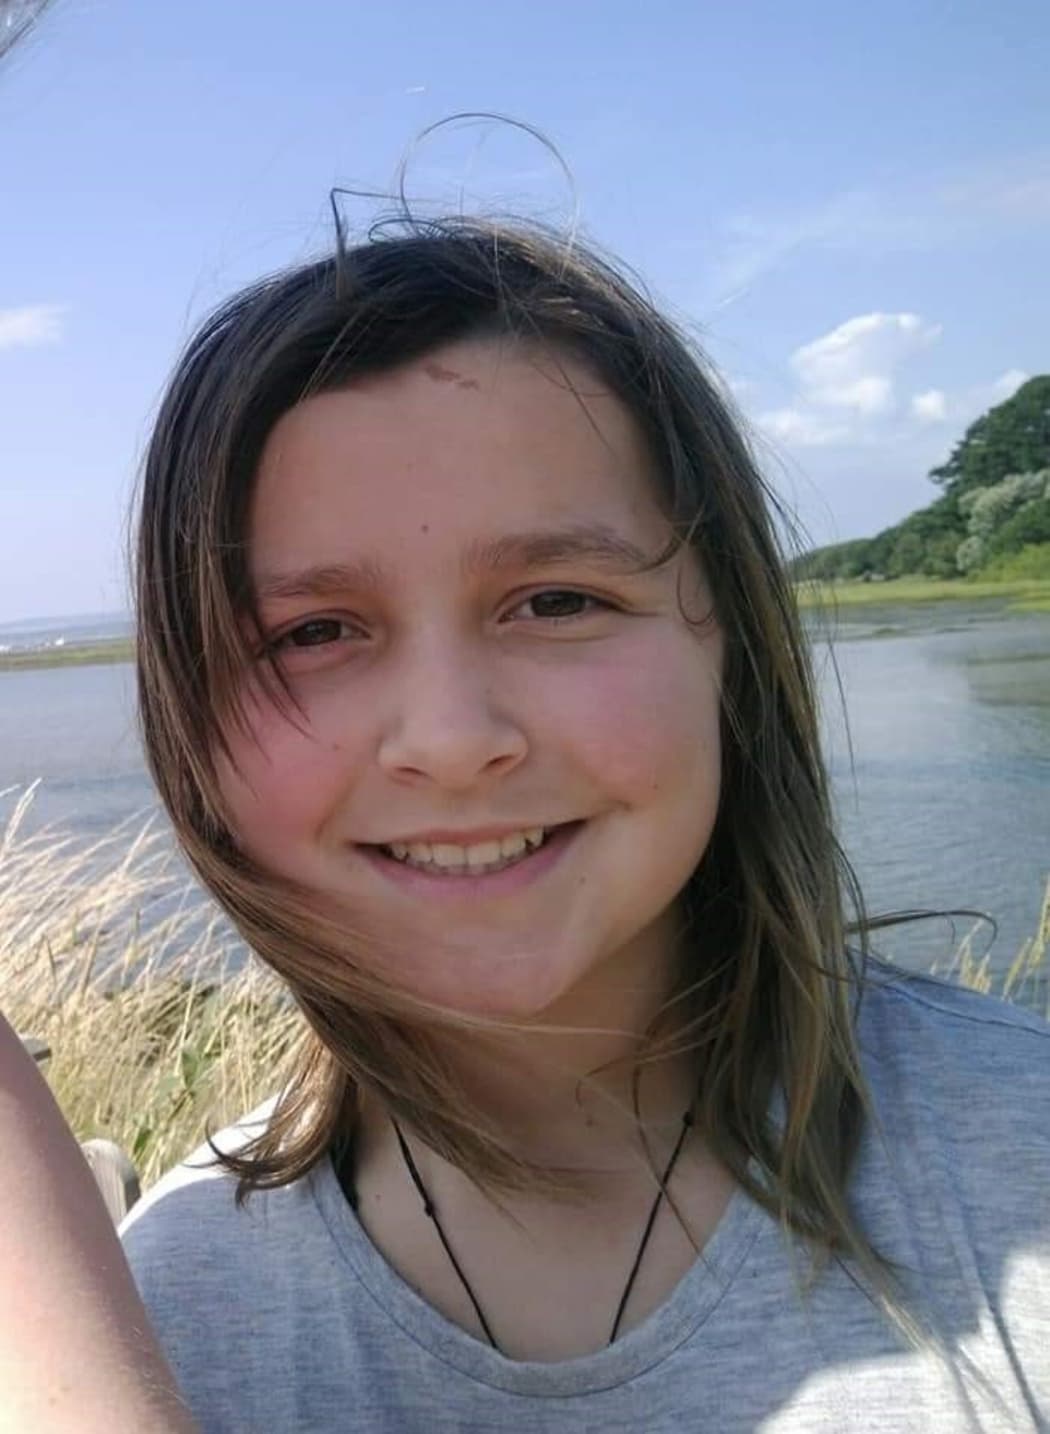 12-year-old Liberty was last seen at her home in Wainuiomata.